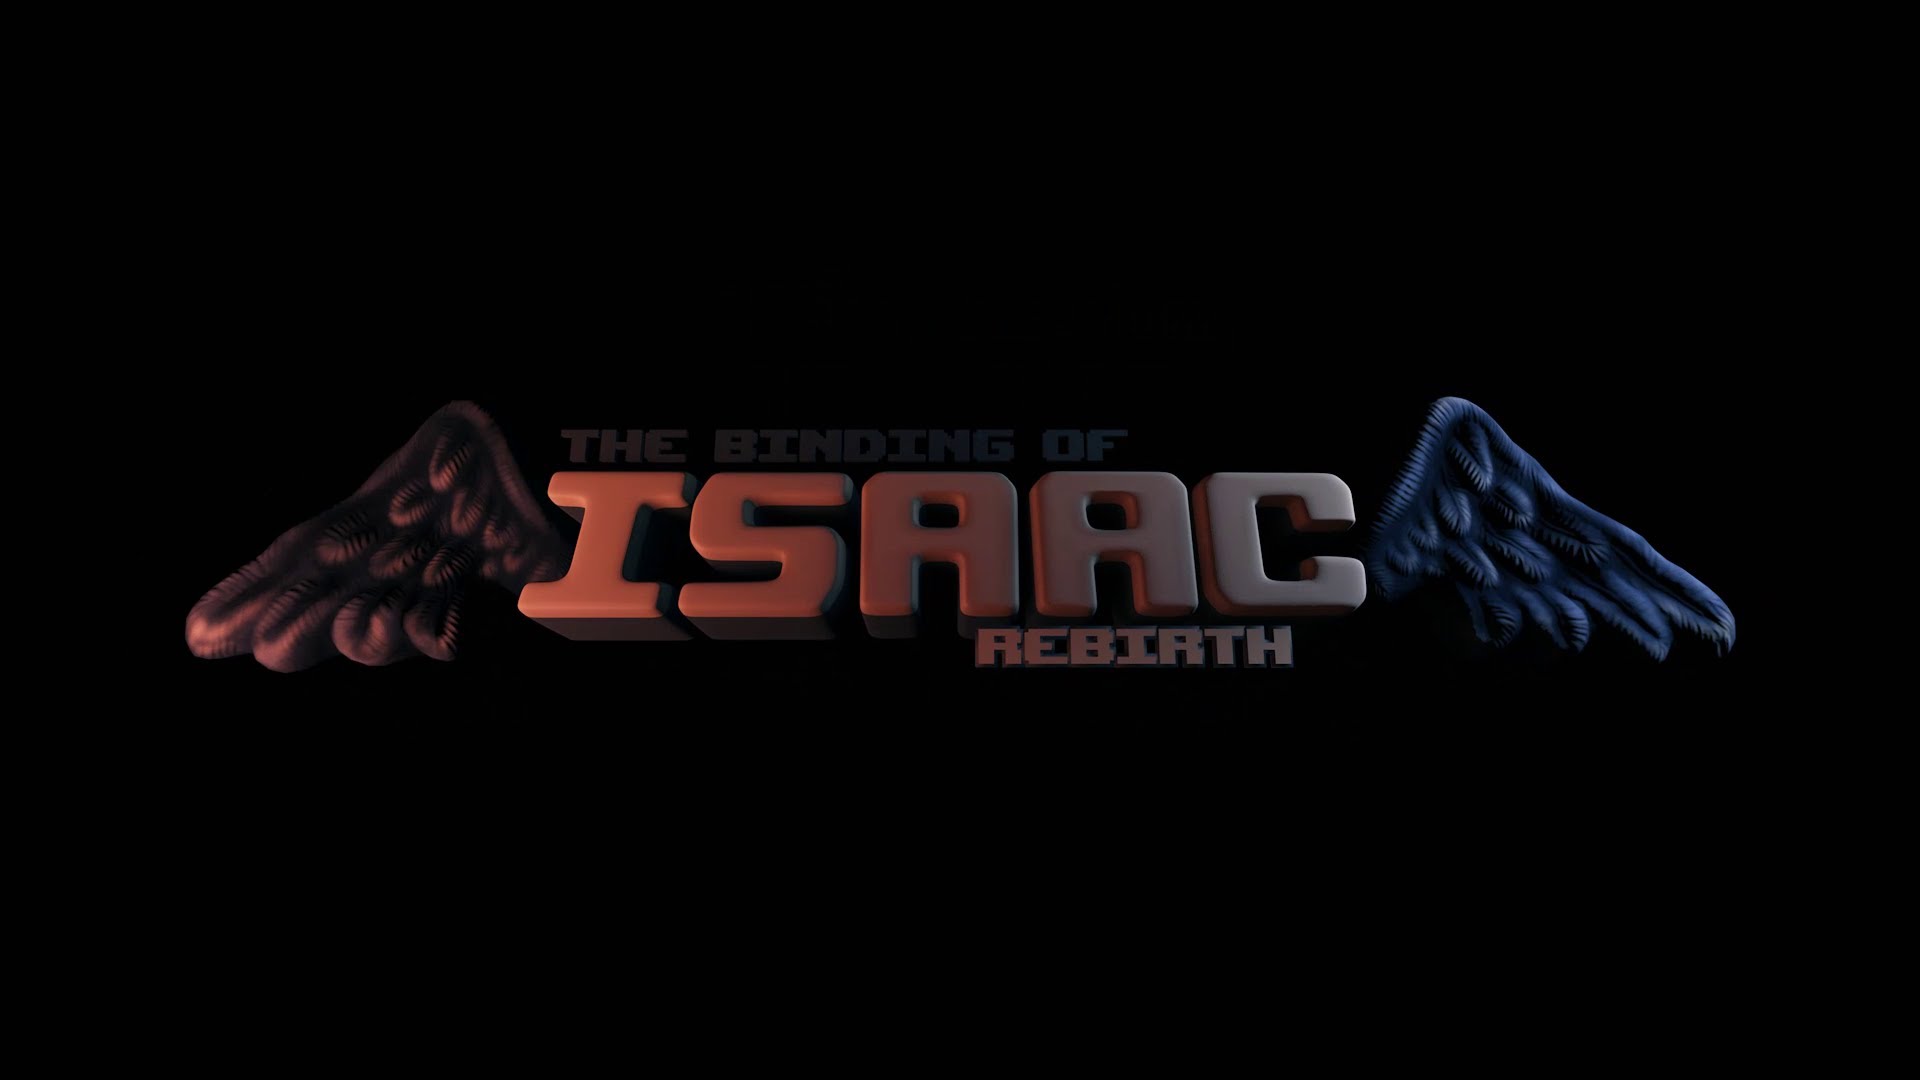 Isaac project image